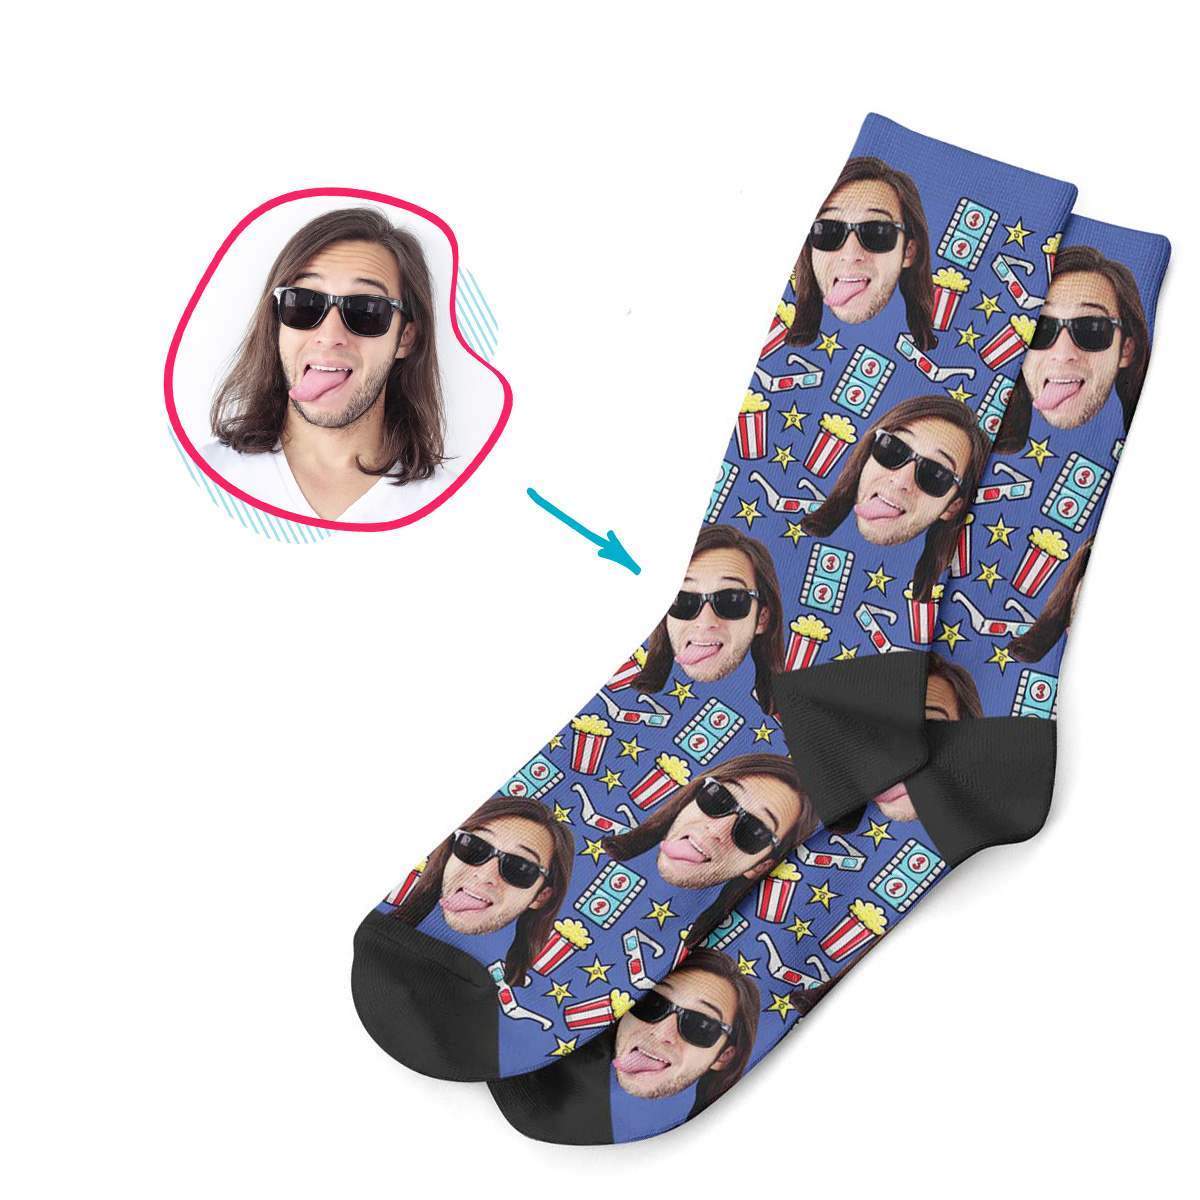 darkblue Movie socks personalized with photo of face printed on them